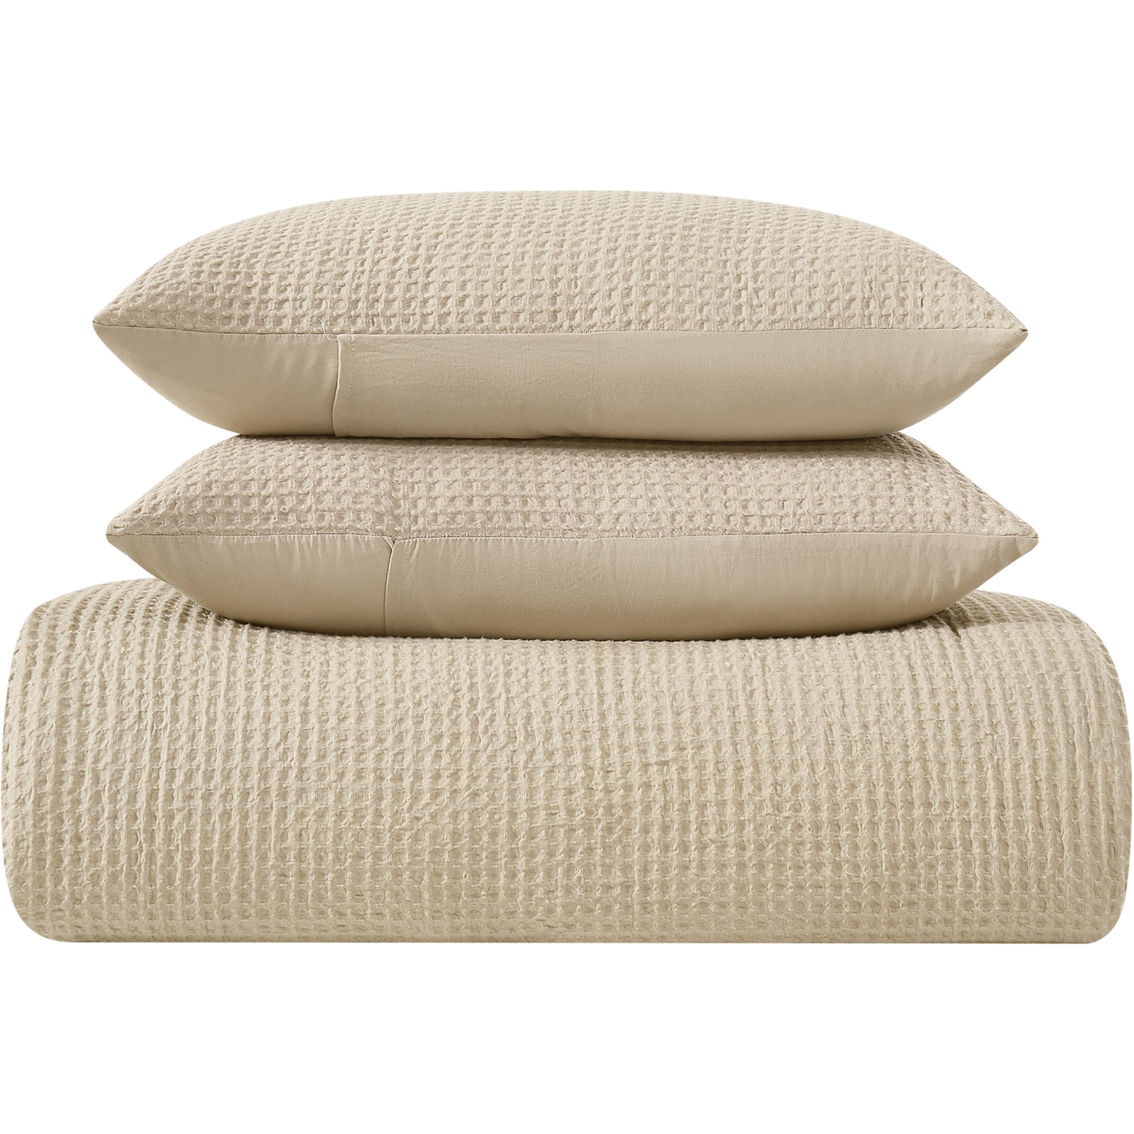 Truly Soft Textured Waffle Comforter 3 pc. Set - Image 2 of 4